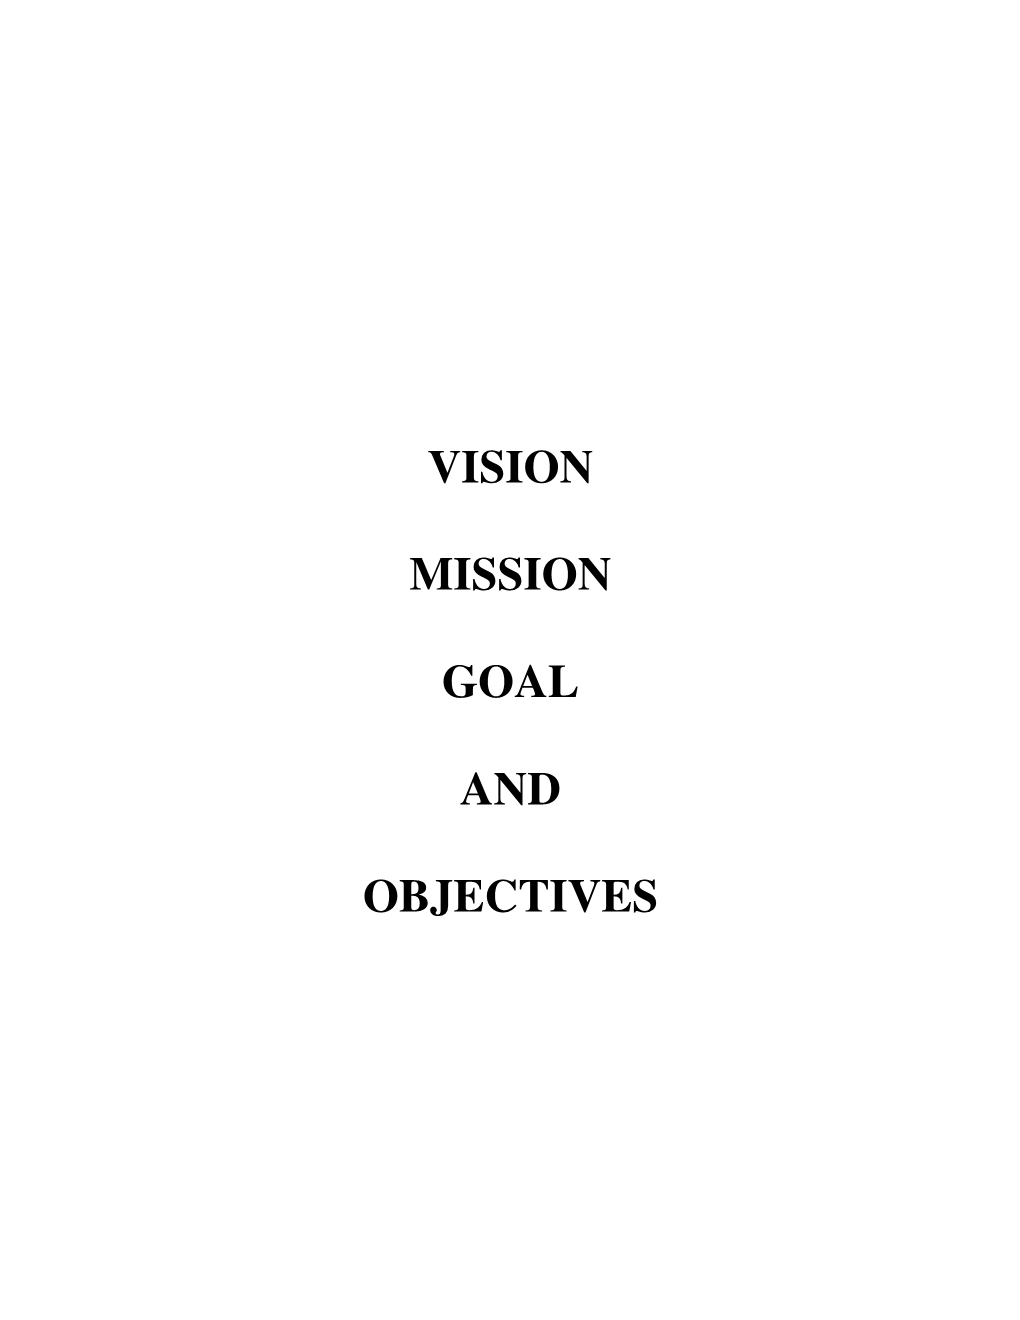 3. Vision, Mission, Goal and Objectives